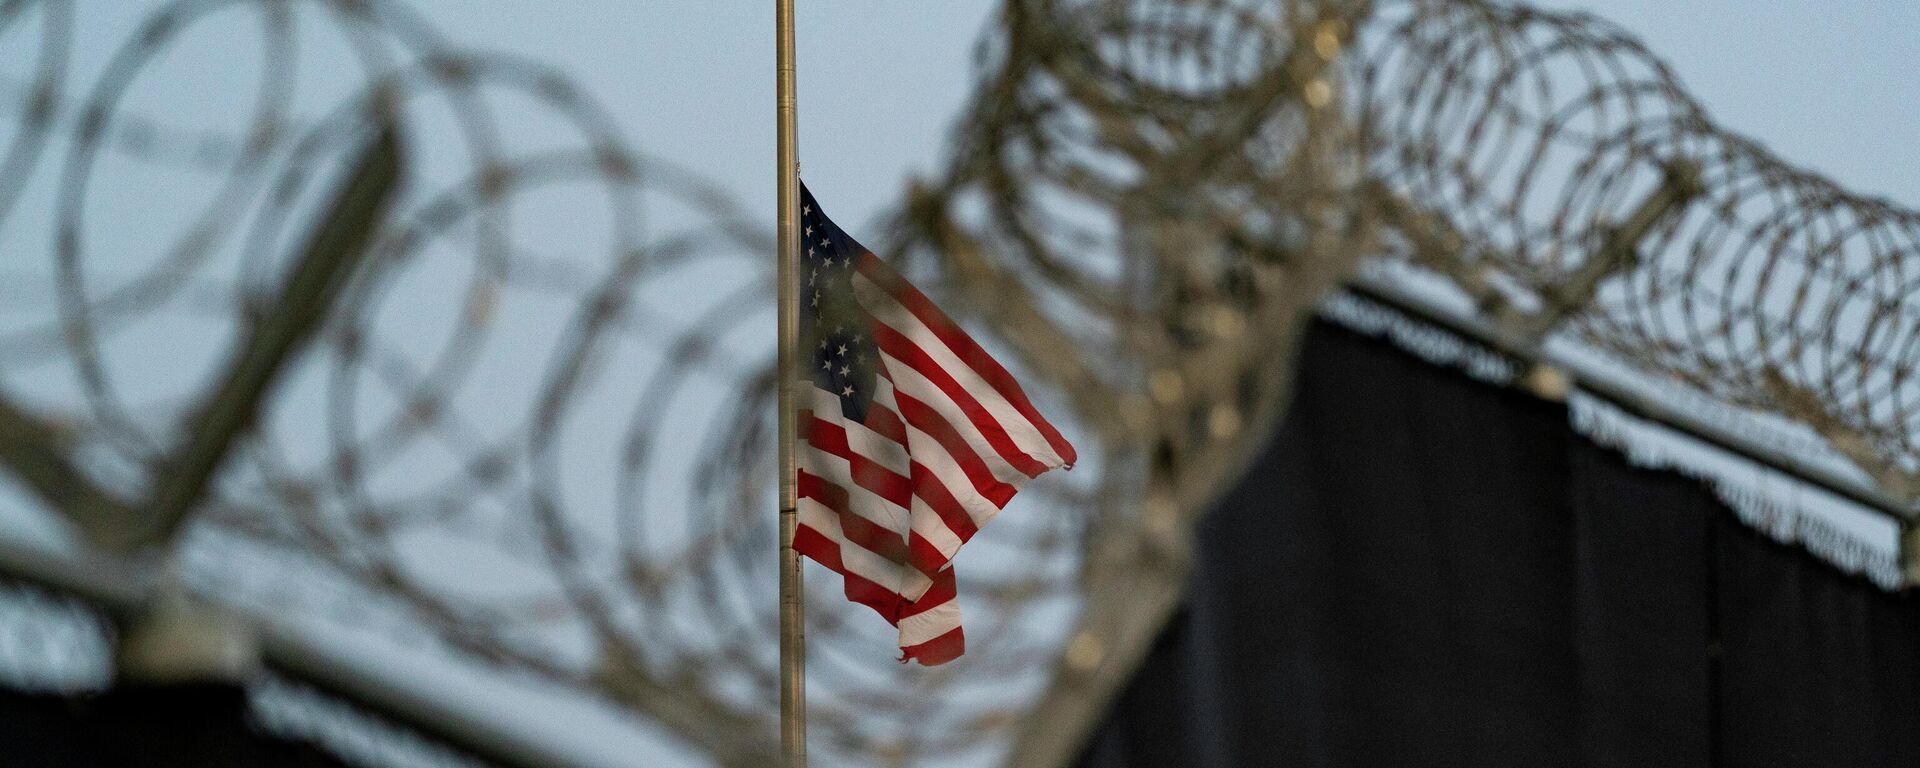 In this Aug. 29, 2021, file photo reviewed by U.S. military officials, a flag flies at half-staff in honor of the U.S. service members and other victims killed in the terrorist attack in Kabul, Afghanistan, as seen from Camp Justice in Guantanamo Bay Naval Base, Cuba. - Sputnik International, 1920, 12.01.2022